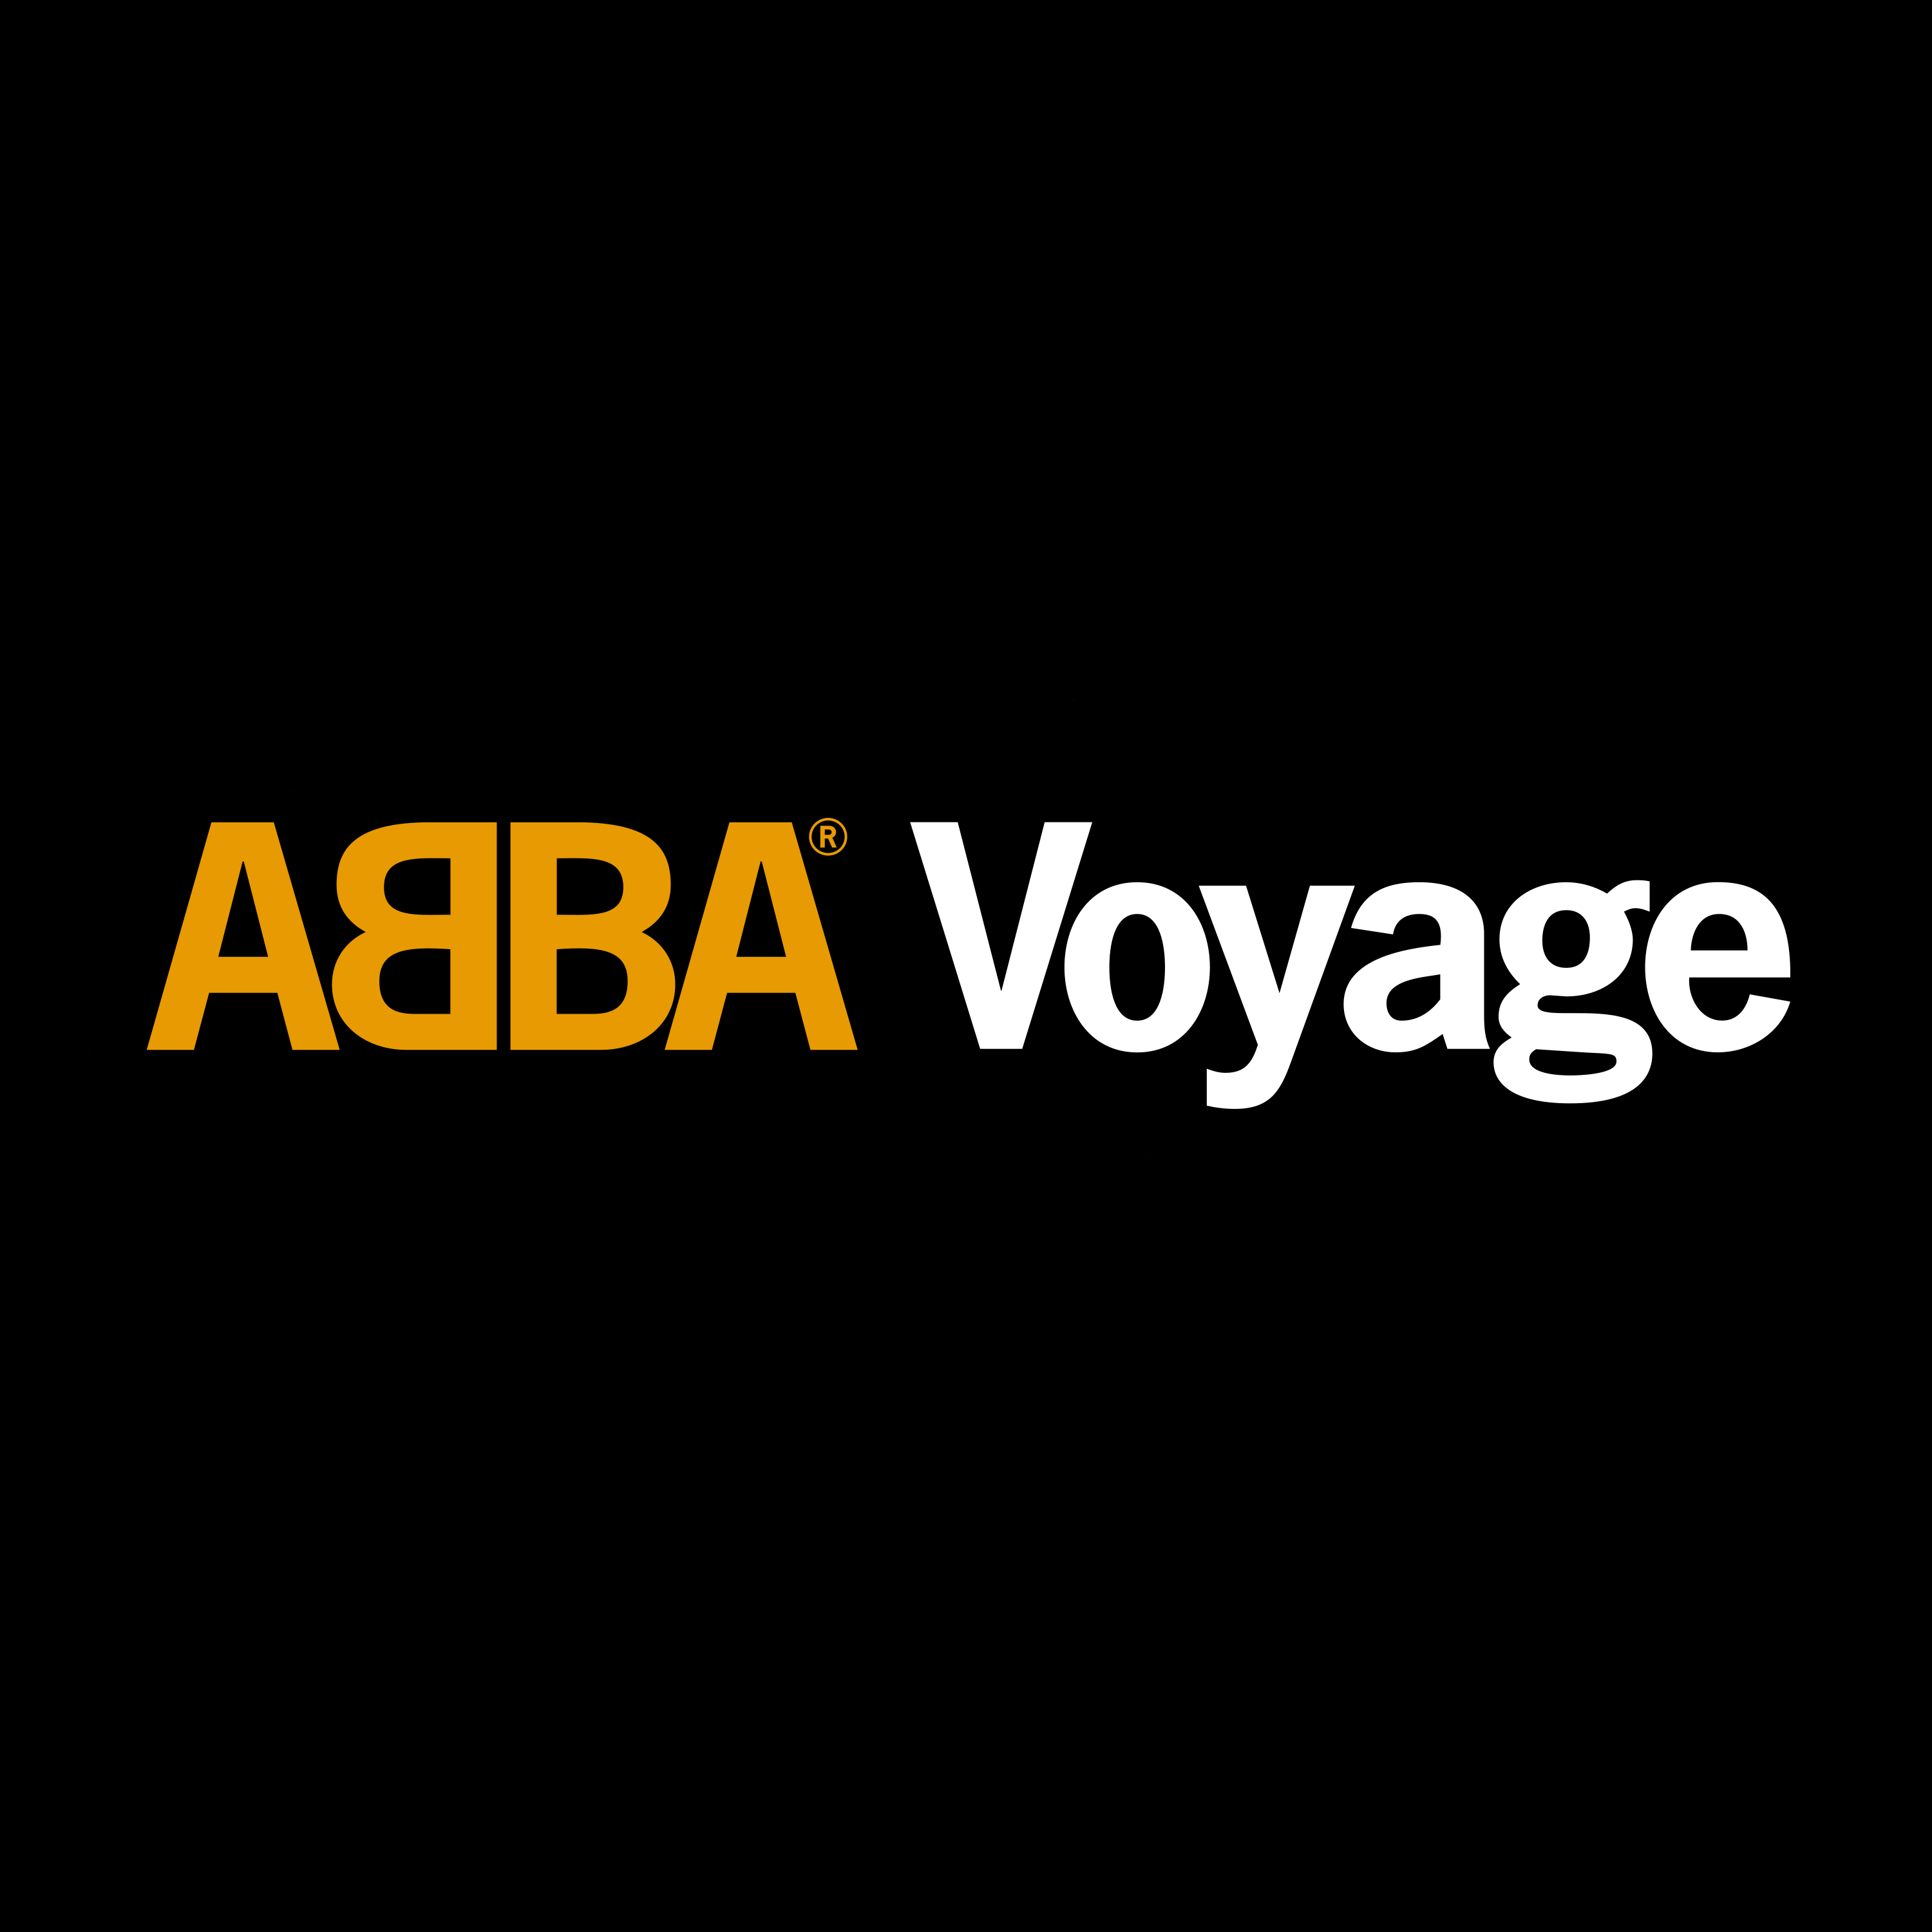 Abba Voyage Coupons & Promo Codes